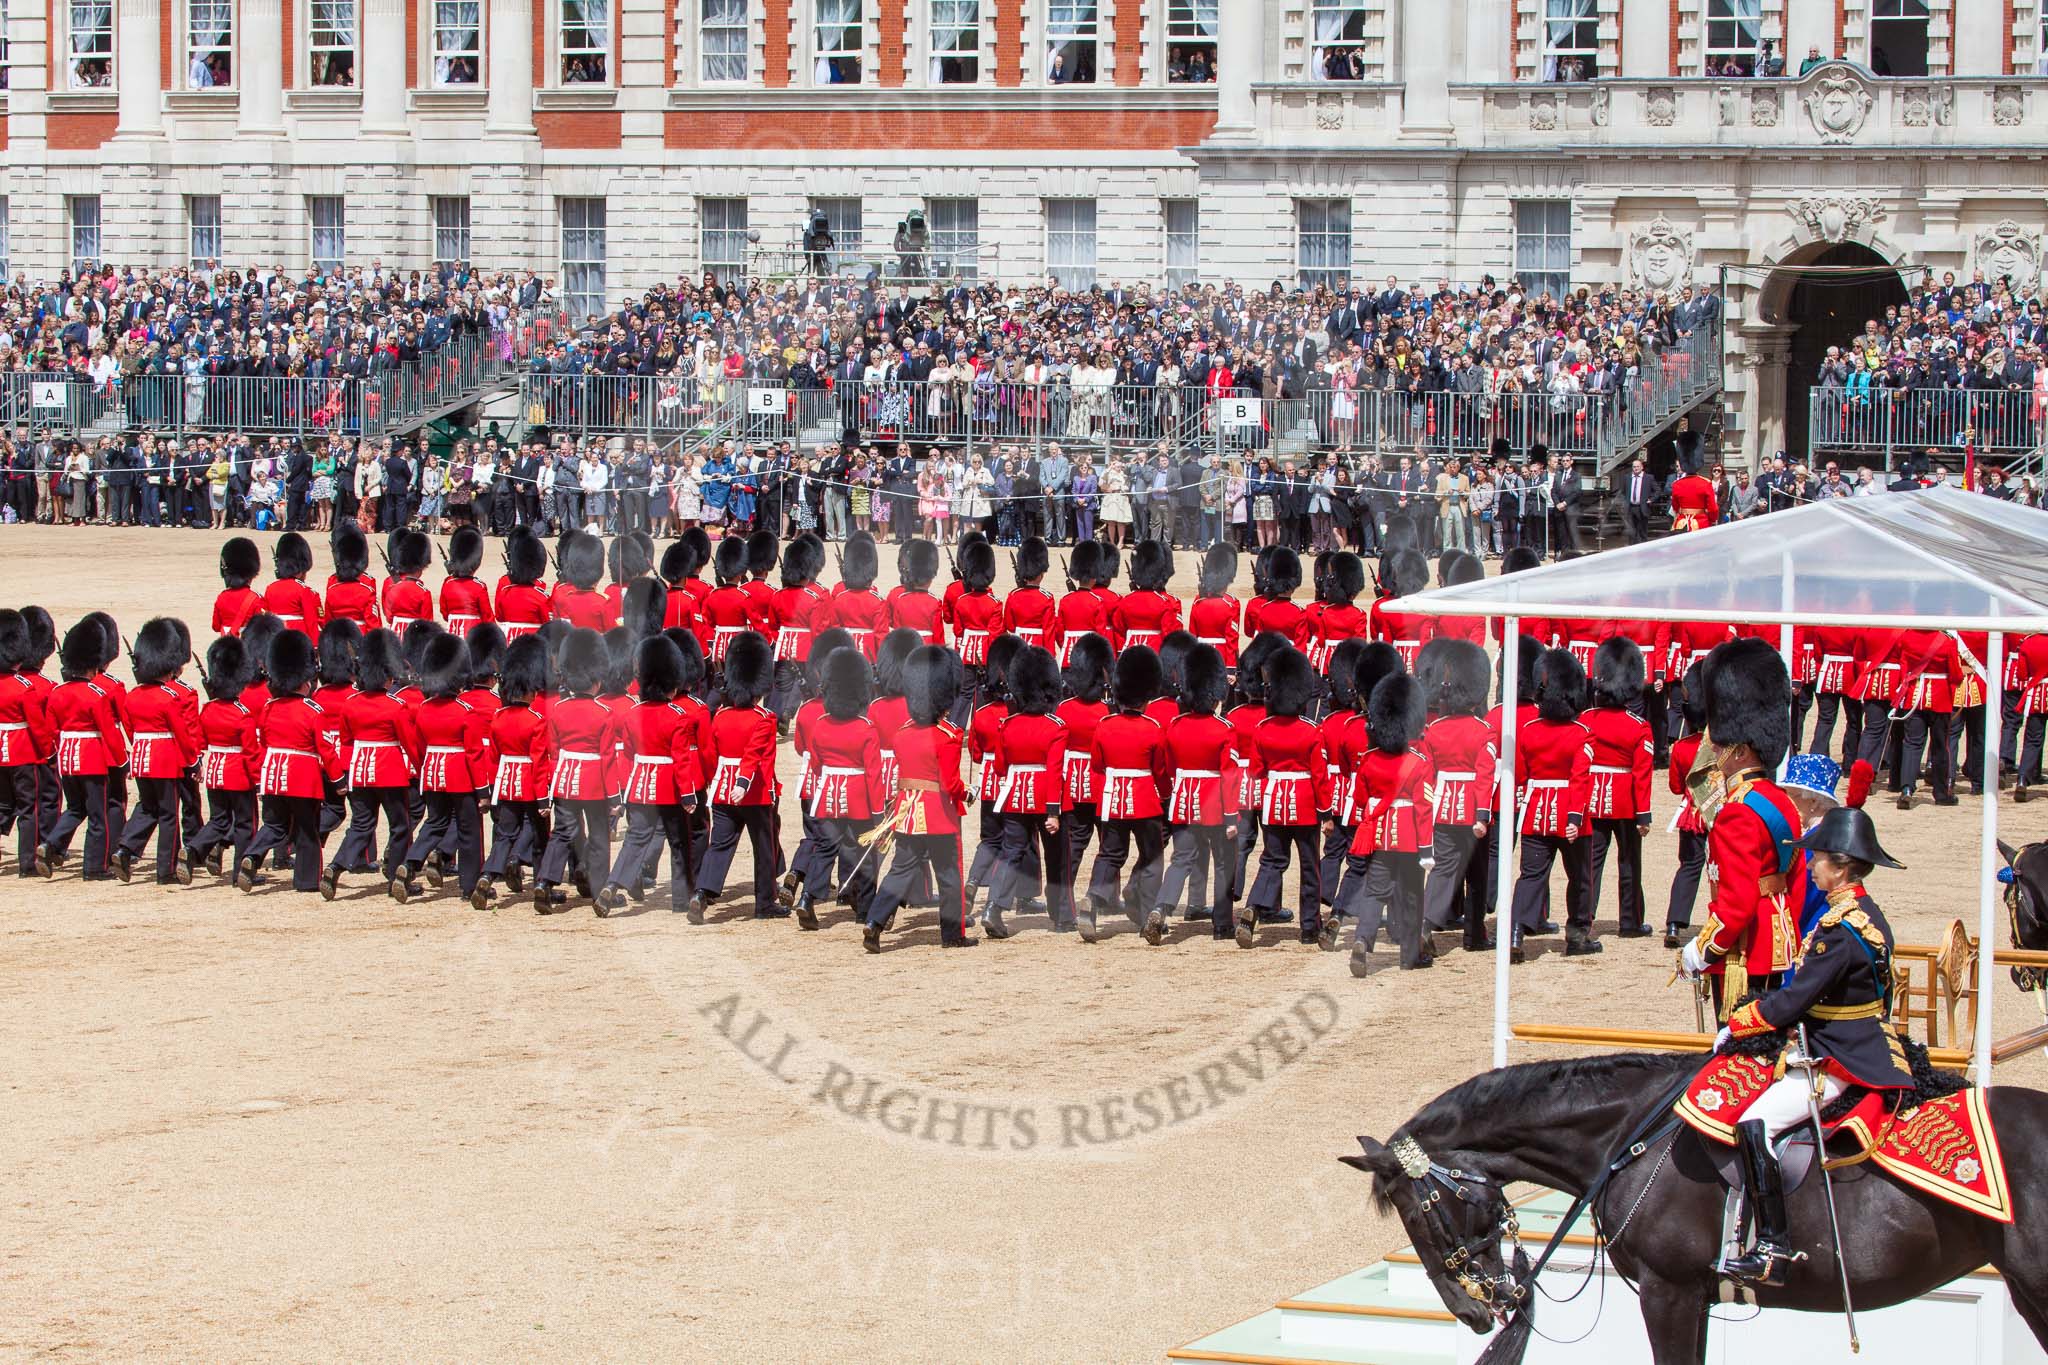 Trooping the Colour 2013: The March Past in Quick Time - No. 1 and No. 2 Guard have just marched past Her Majesty. Image #607, 15 June 2013 11:46 Horse Guards Parade, London, UK